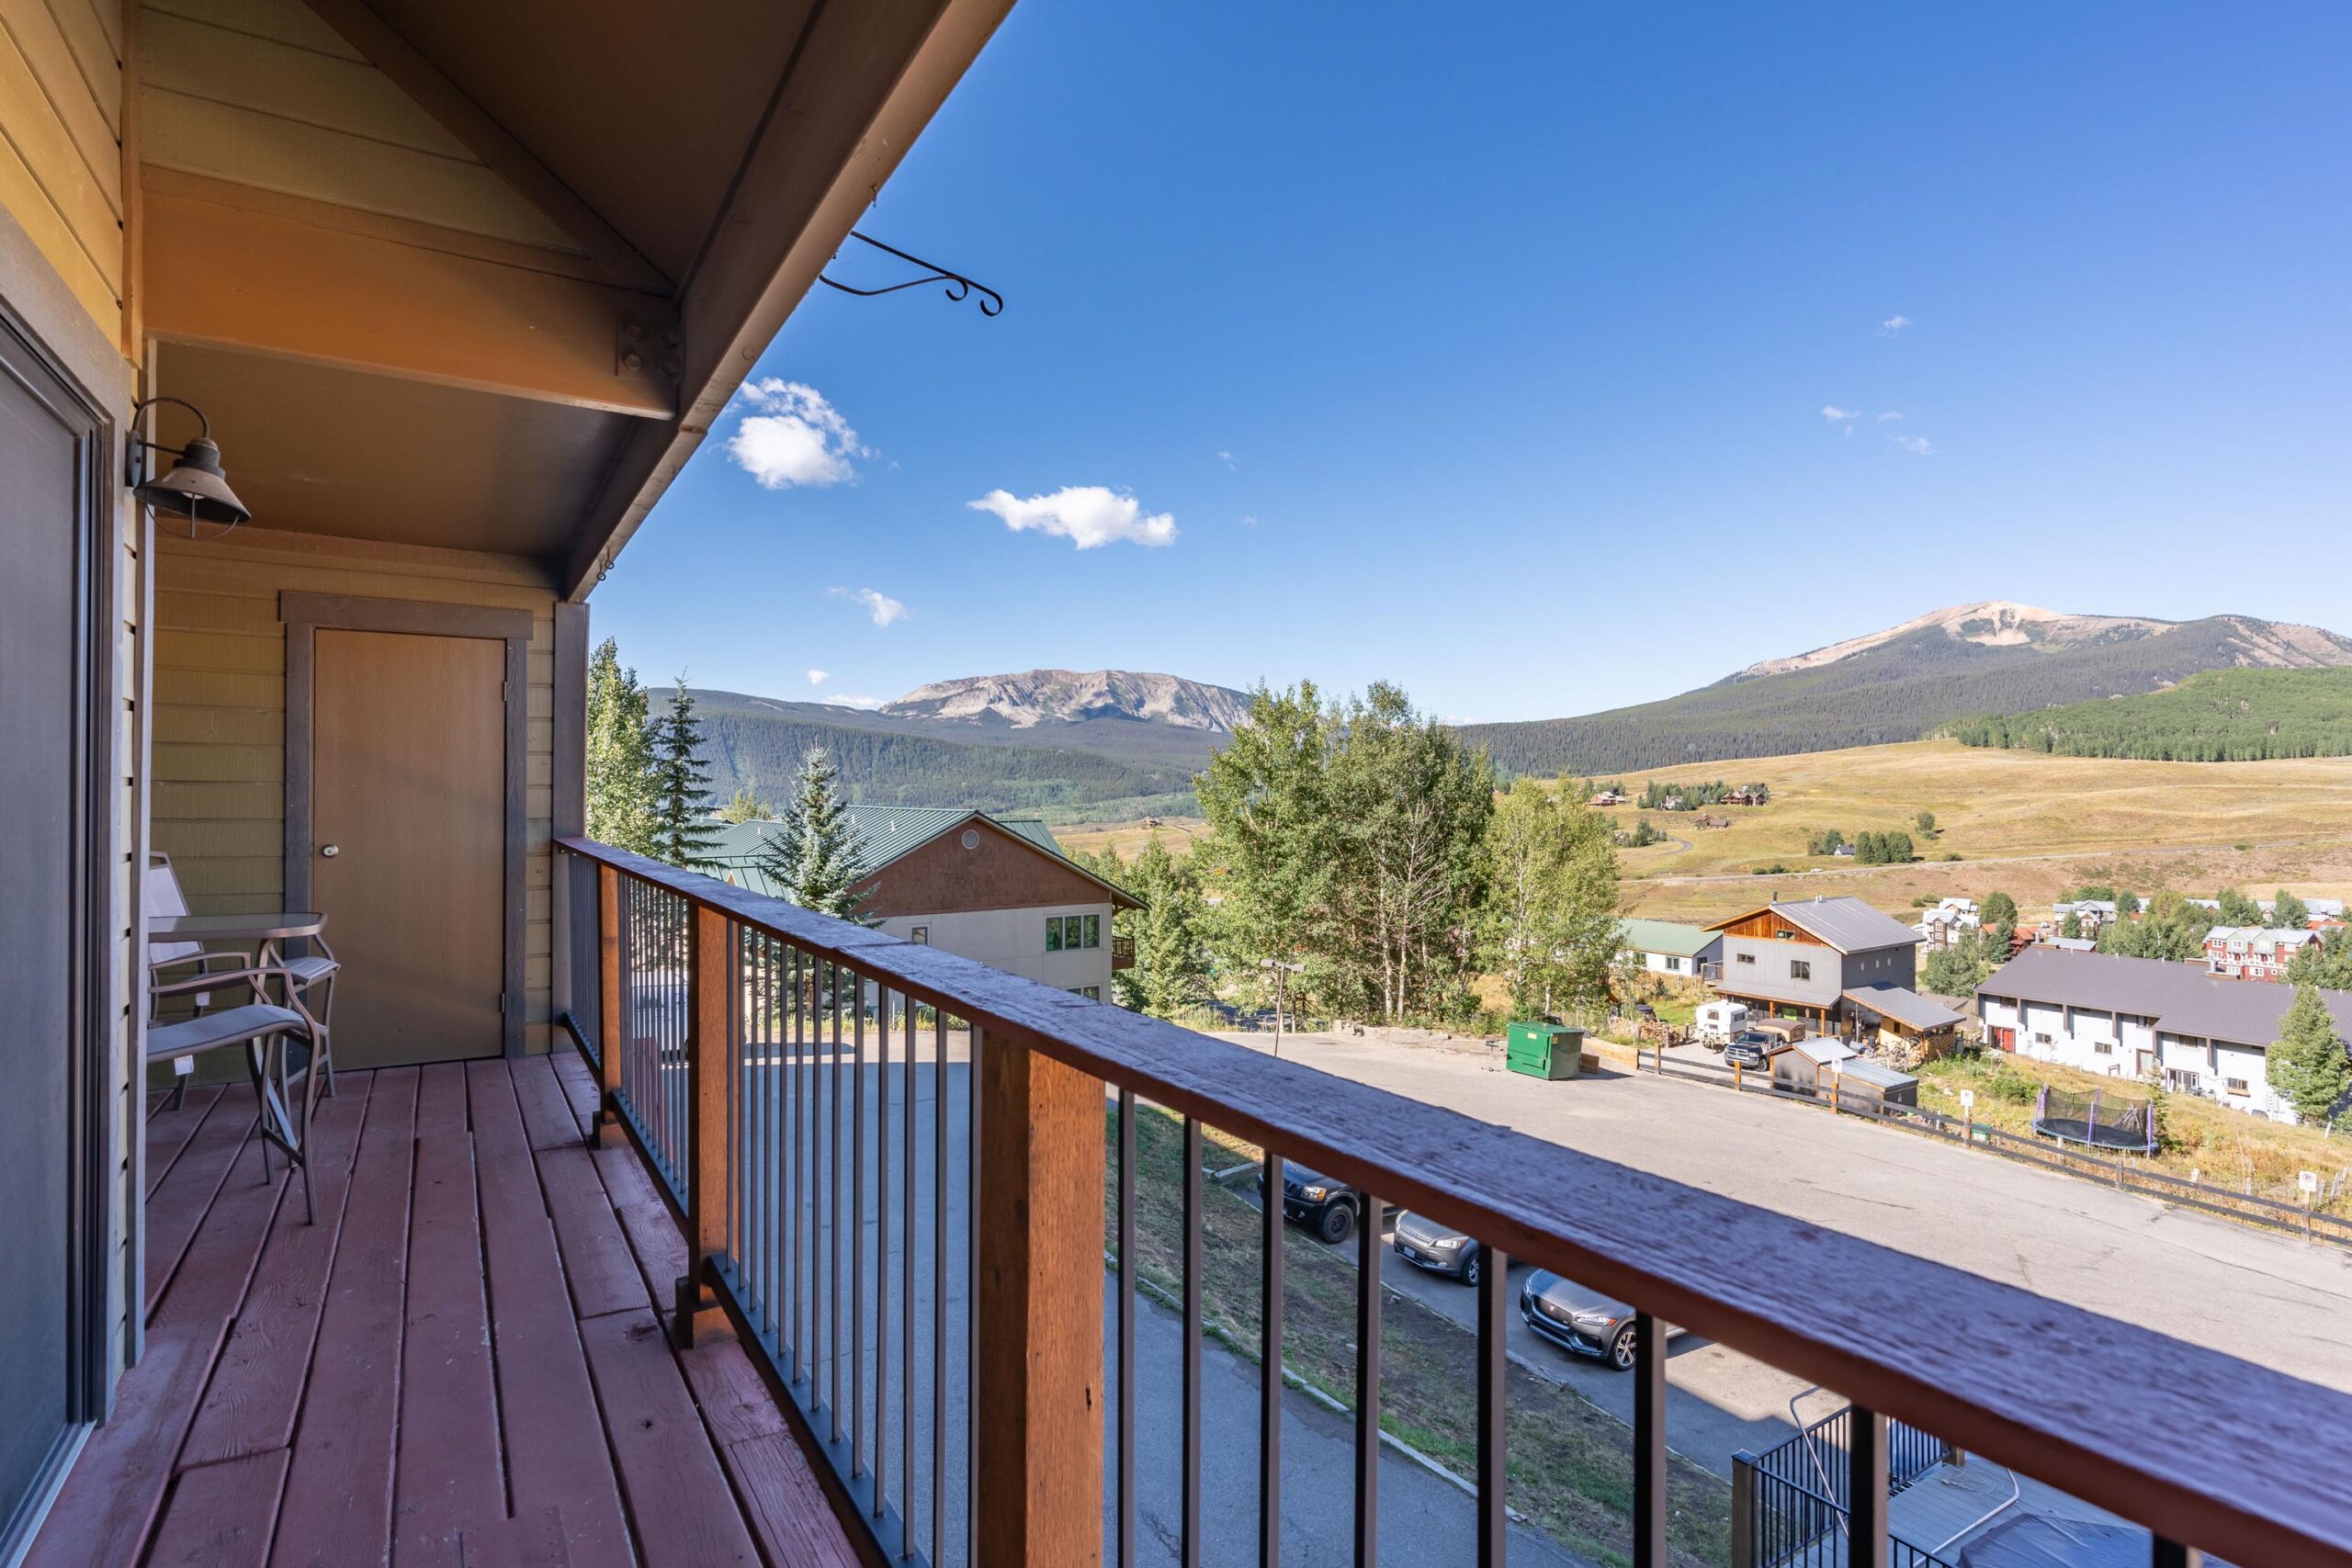 20 Paradise Road 208 Mt. Crested Butte, Colorado - view from balcony